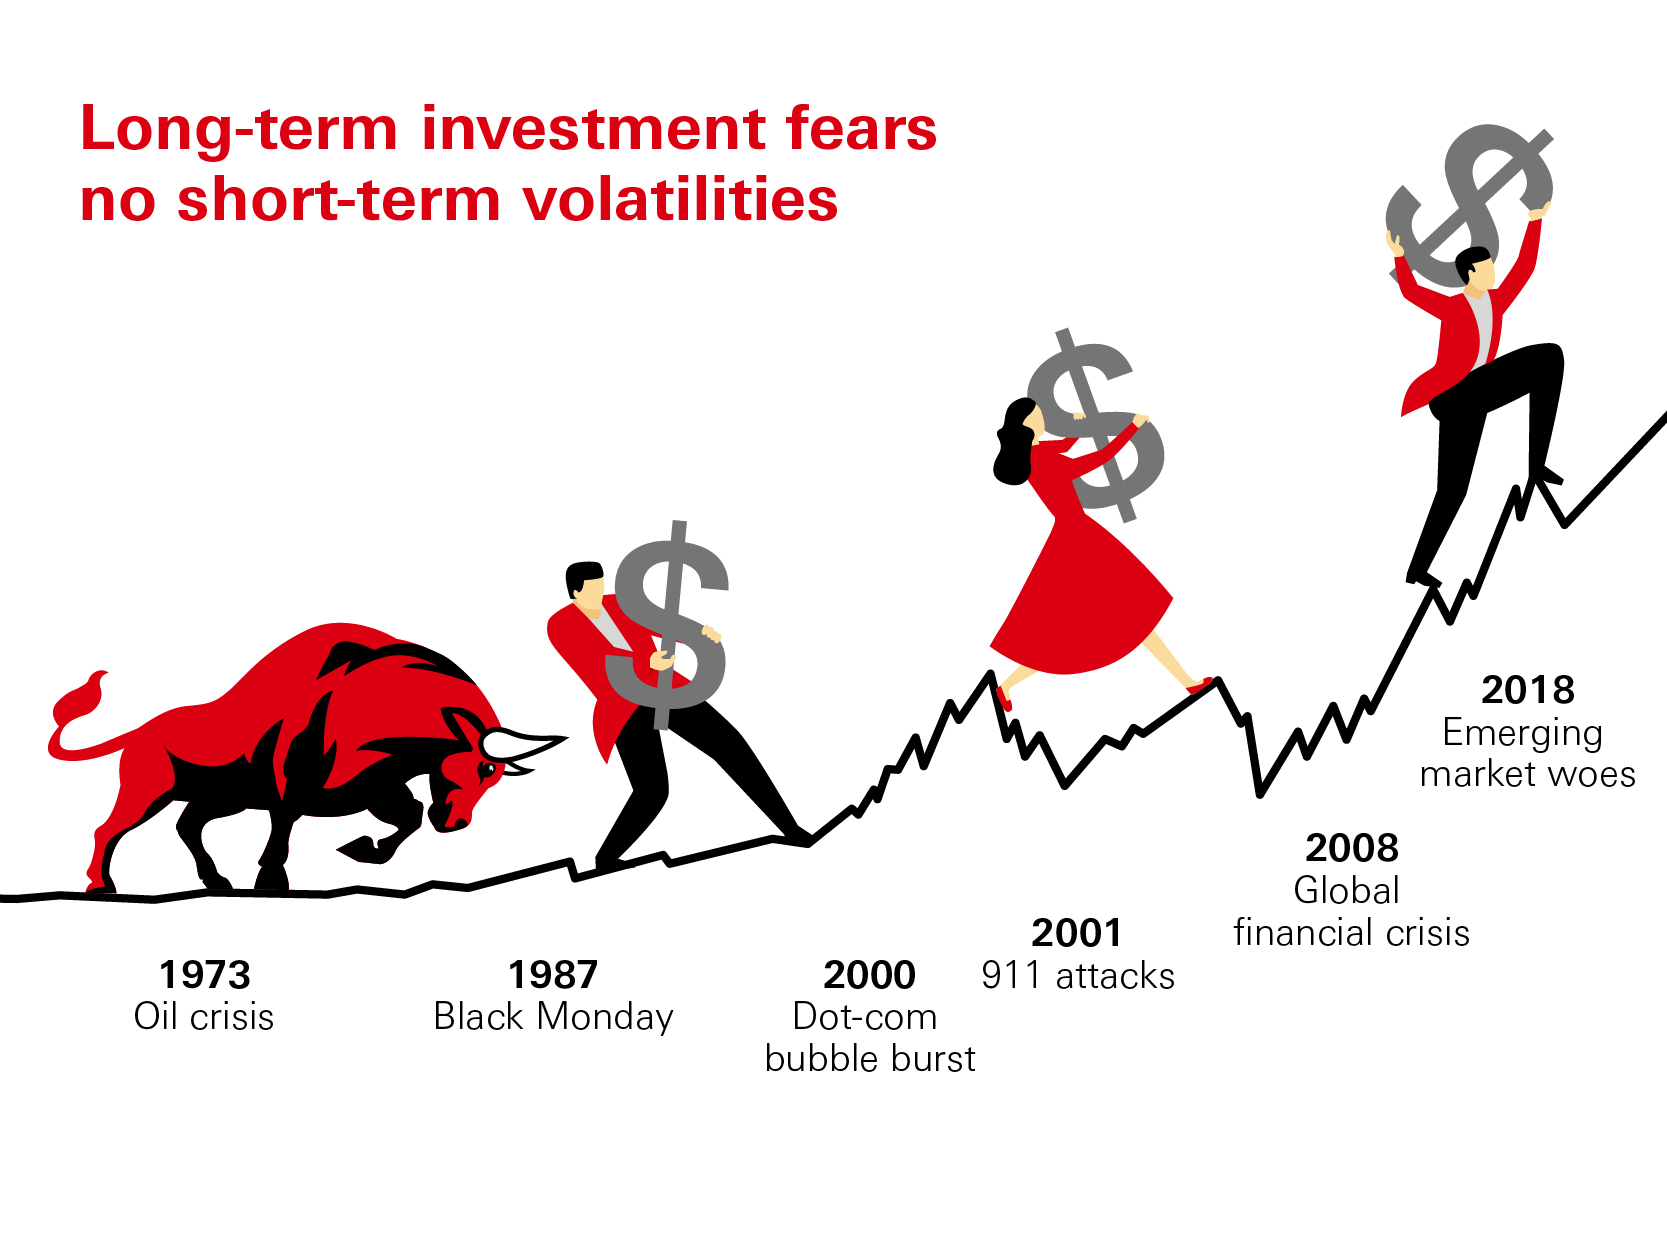 Long-term investment fears no short-term volatilities. Historically there are many financial events and economic crises (such as the dot-com bubble burst in 2000 and the global financial crisis in 2008) that lead to stock market crashes. Yet more often than not stock prices recover the lost ground and rise steadily. 